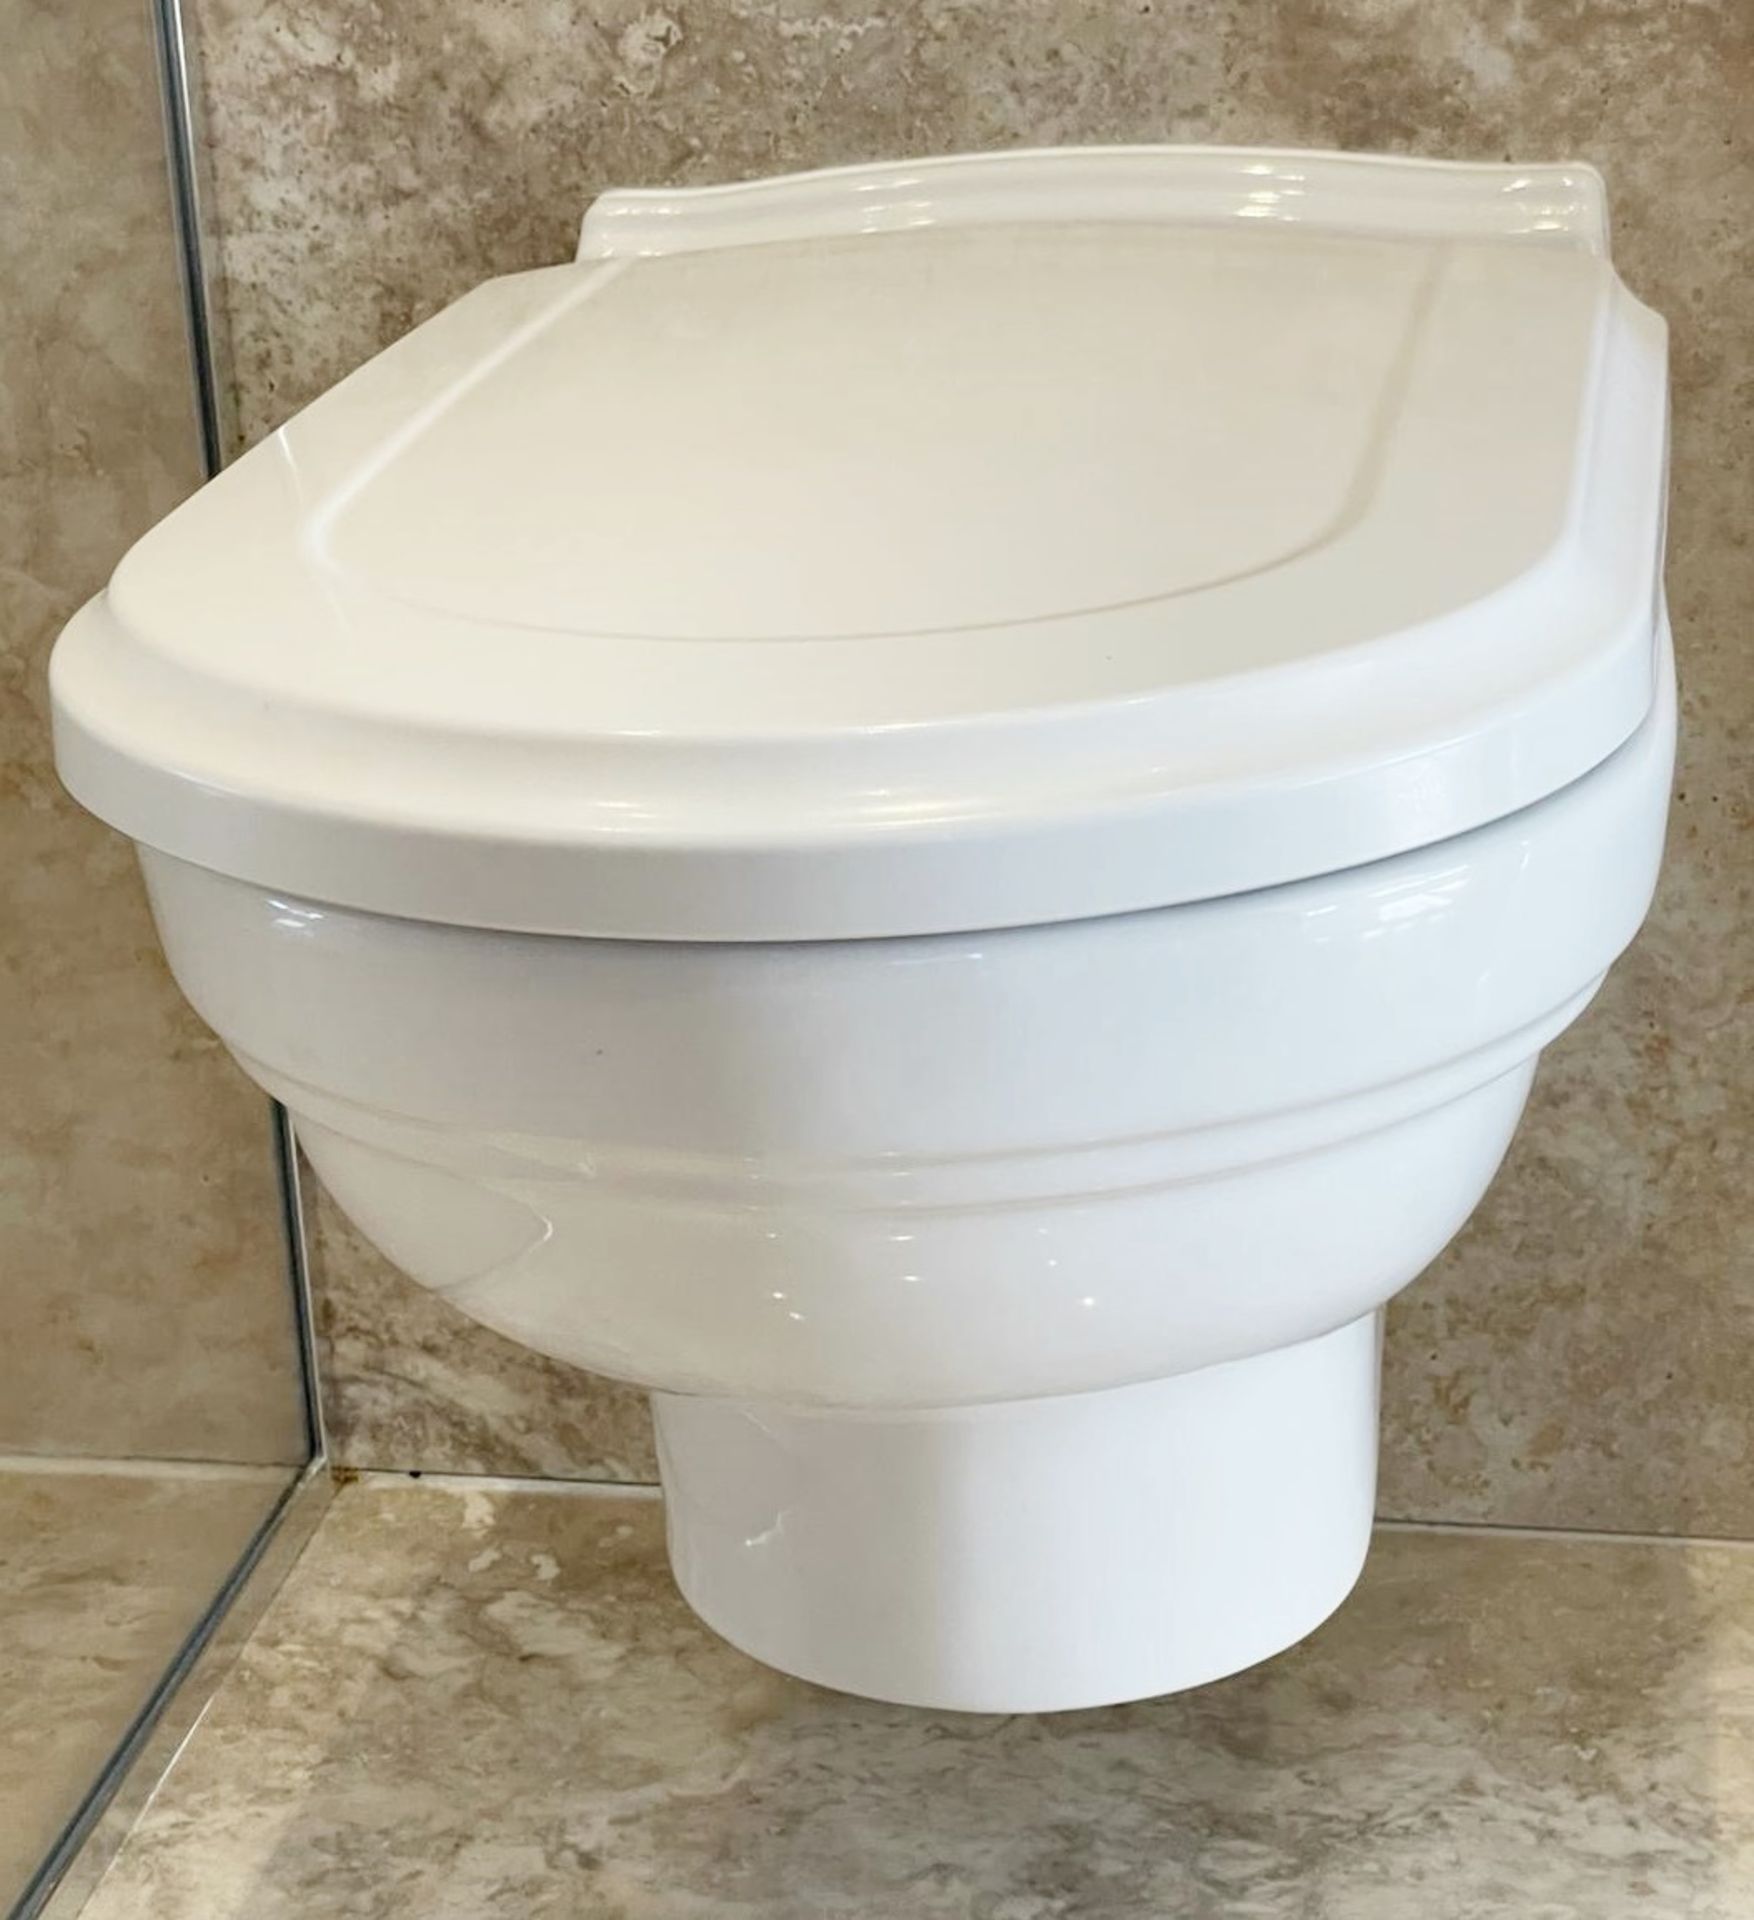 1 x VILLEROY & BOCH Wall Hung Toilet with Geberit Flush Plate - Ref: PAN273 BED3bth - CL896 - NO VAT - Image 9 of 9